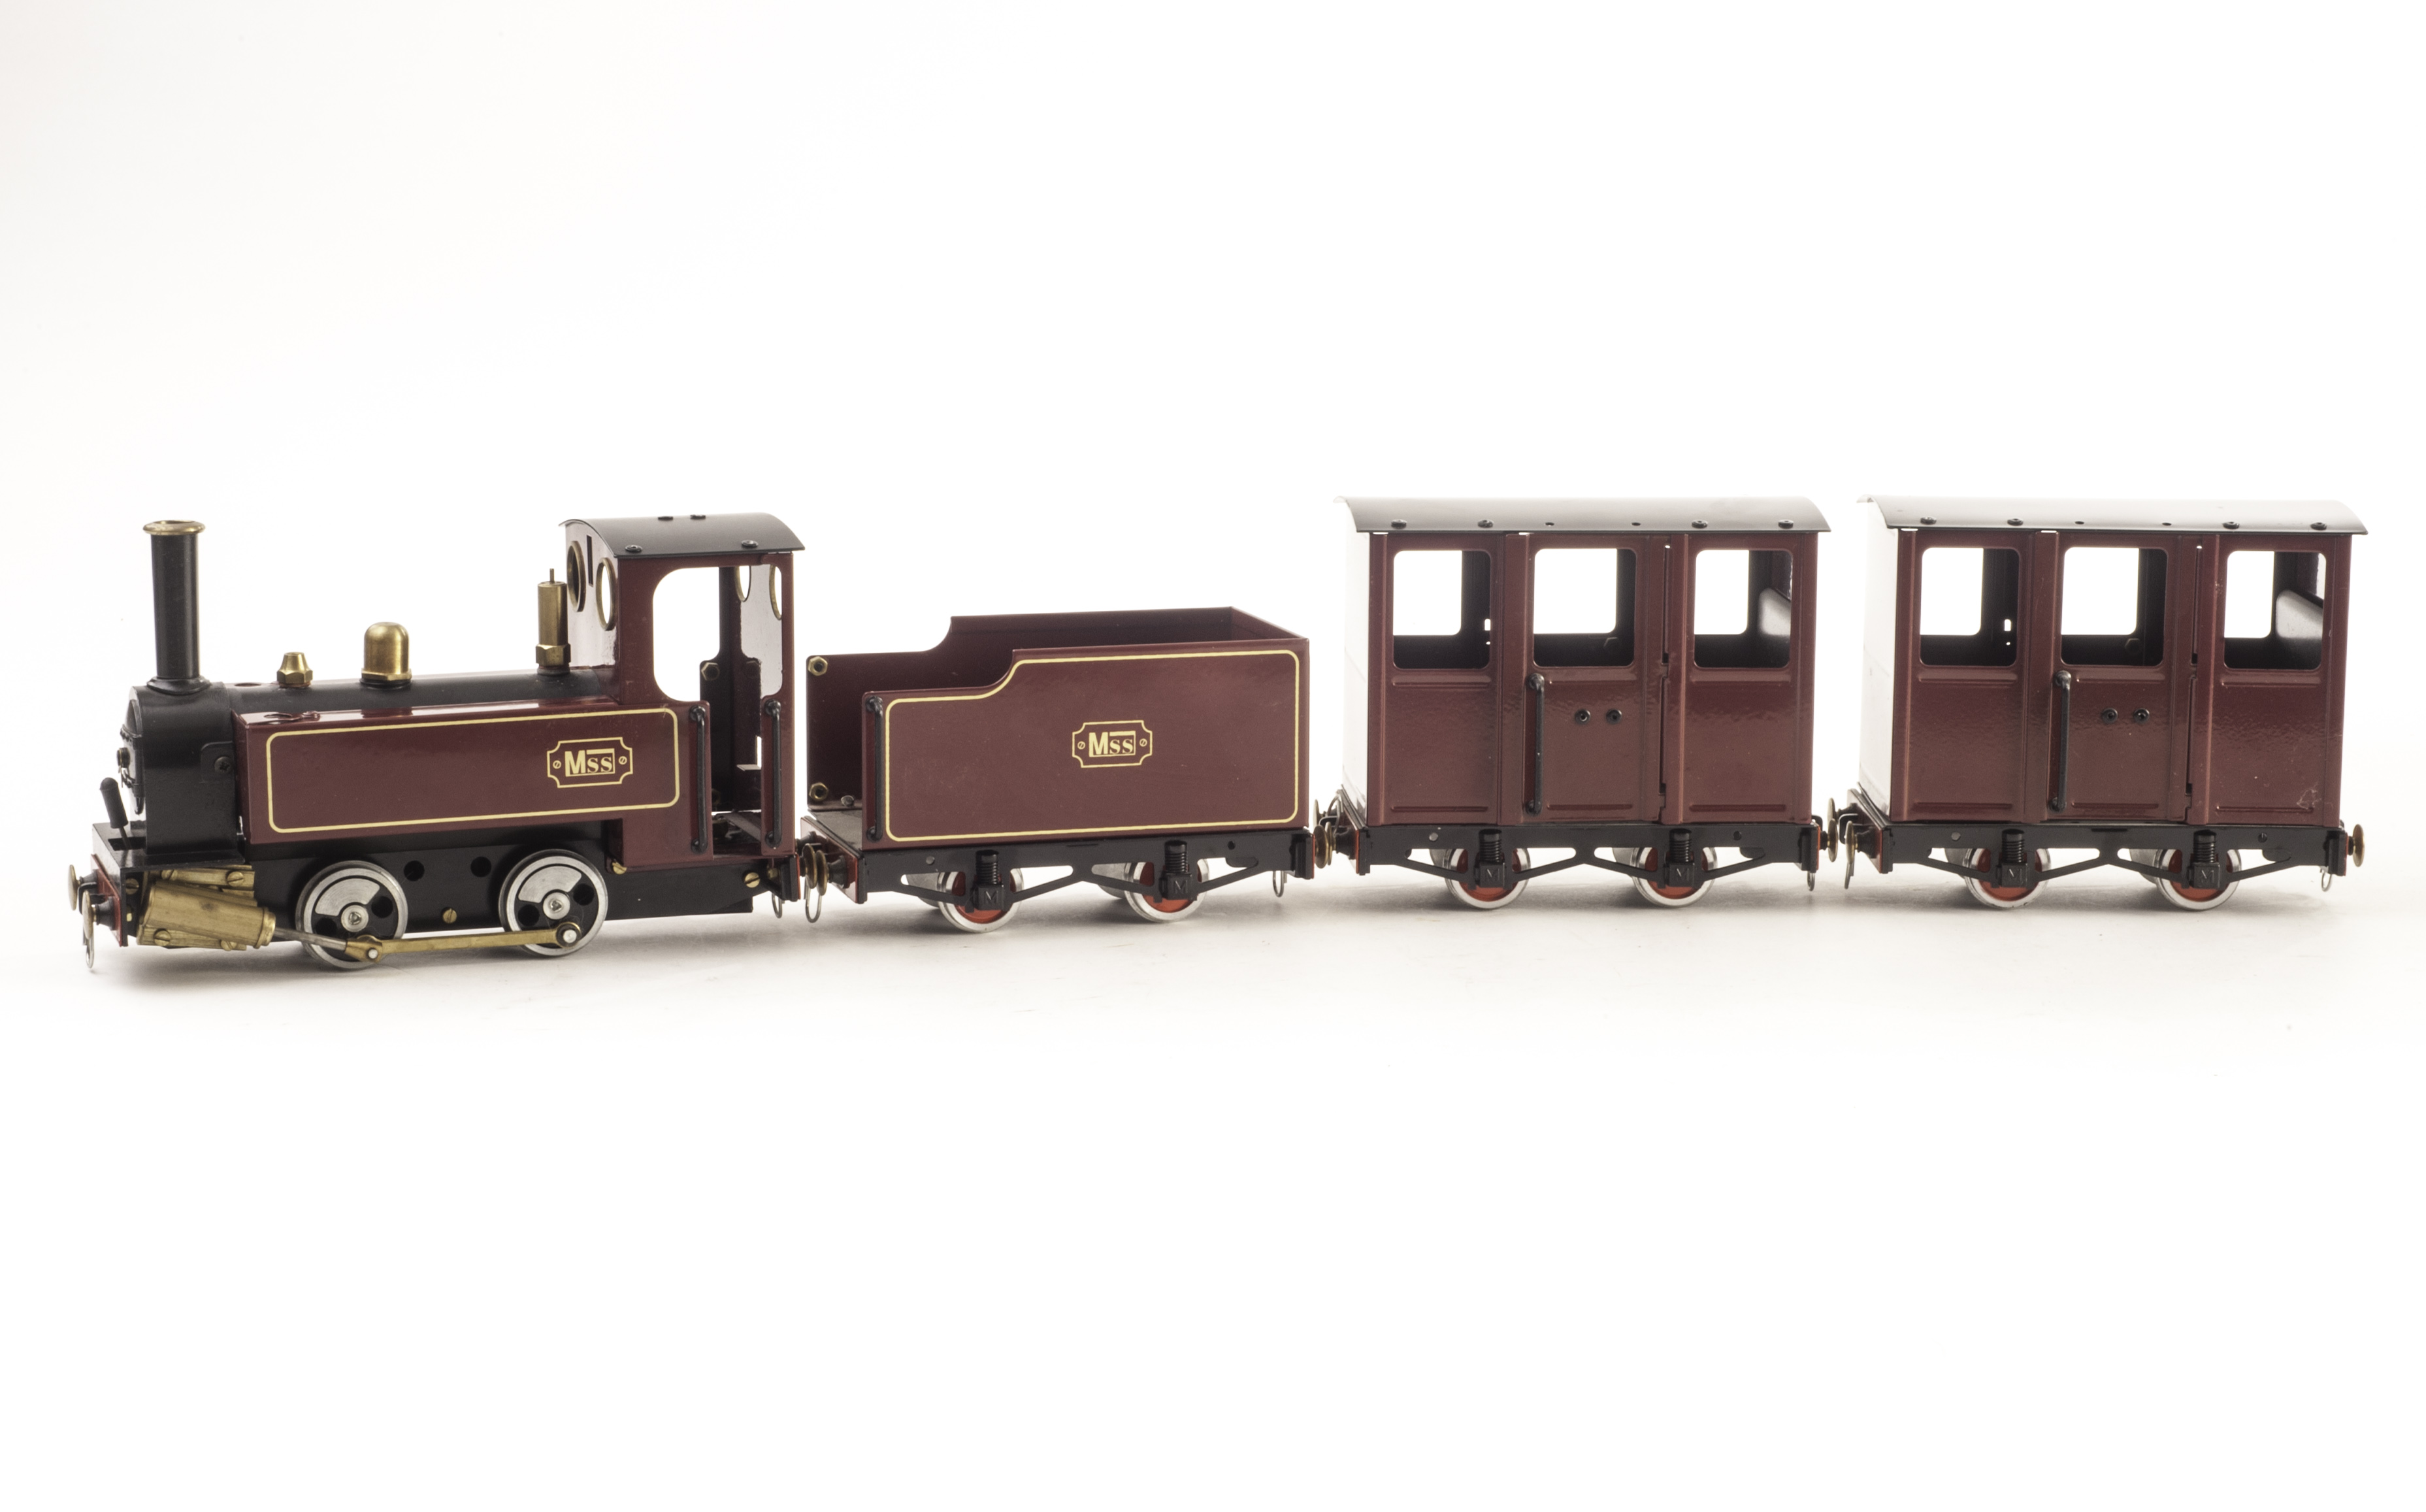 A Mamod MSS Gauge I Live Steam Maroon Train Set, comprising 0-4-0 MSS Locomotive and 4-wheel Tender